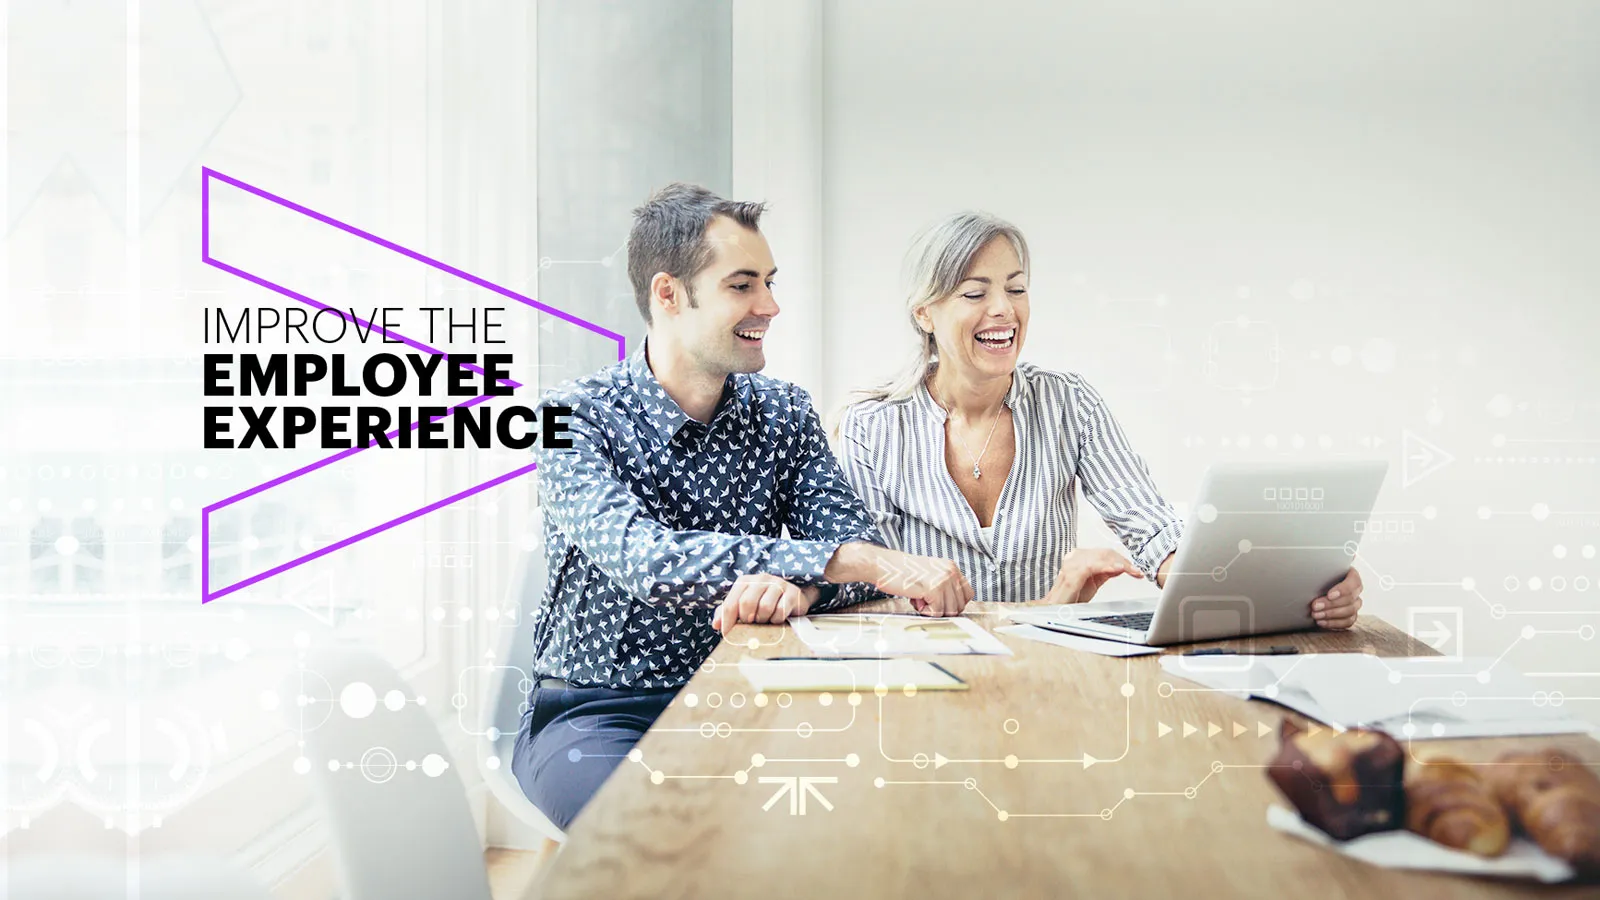 6 Ways You Can Improve Your Employee Experience